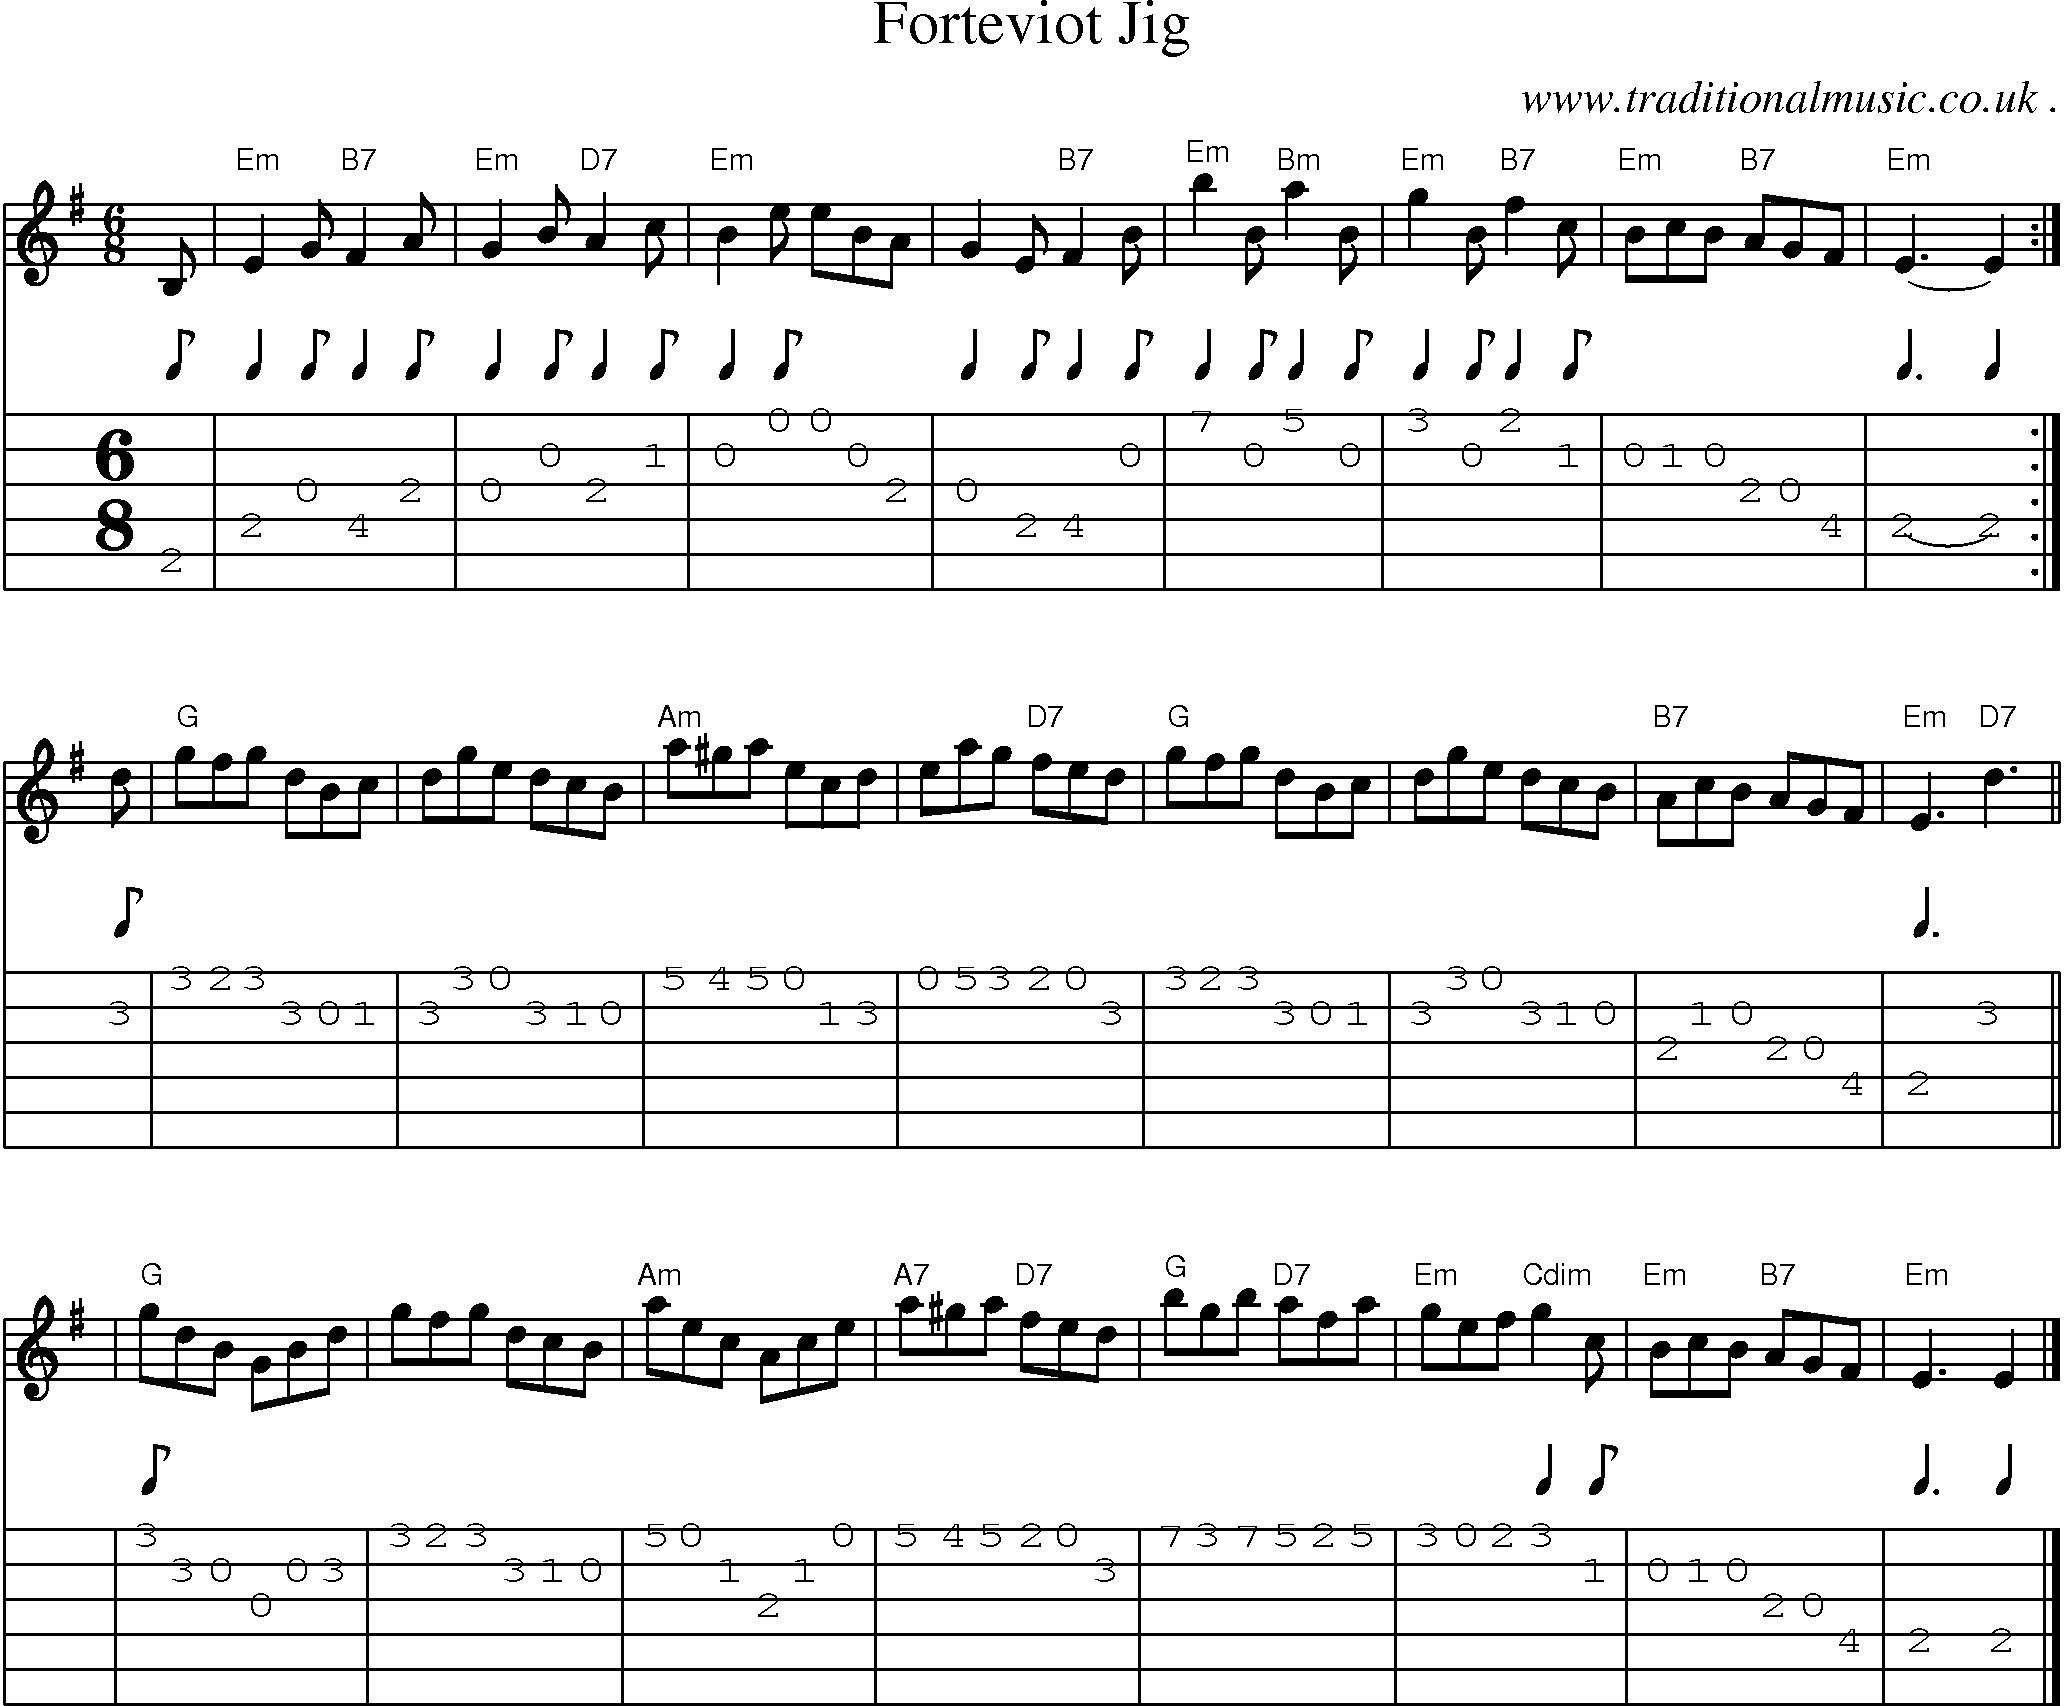 Sheet-music  score, Chords and Guitar Tabs for Forteviot Jig